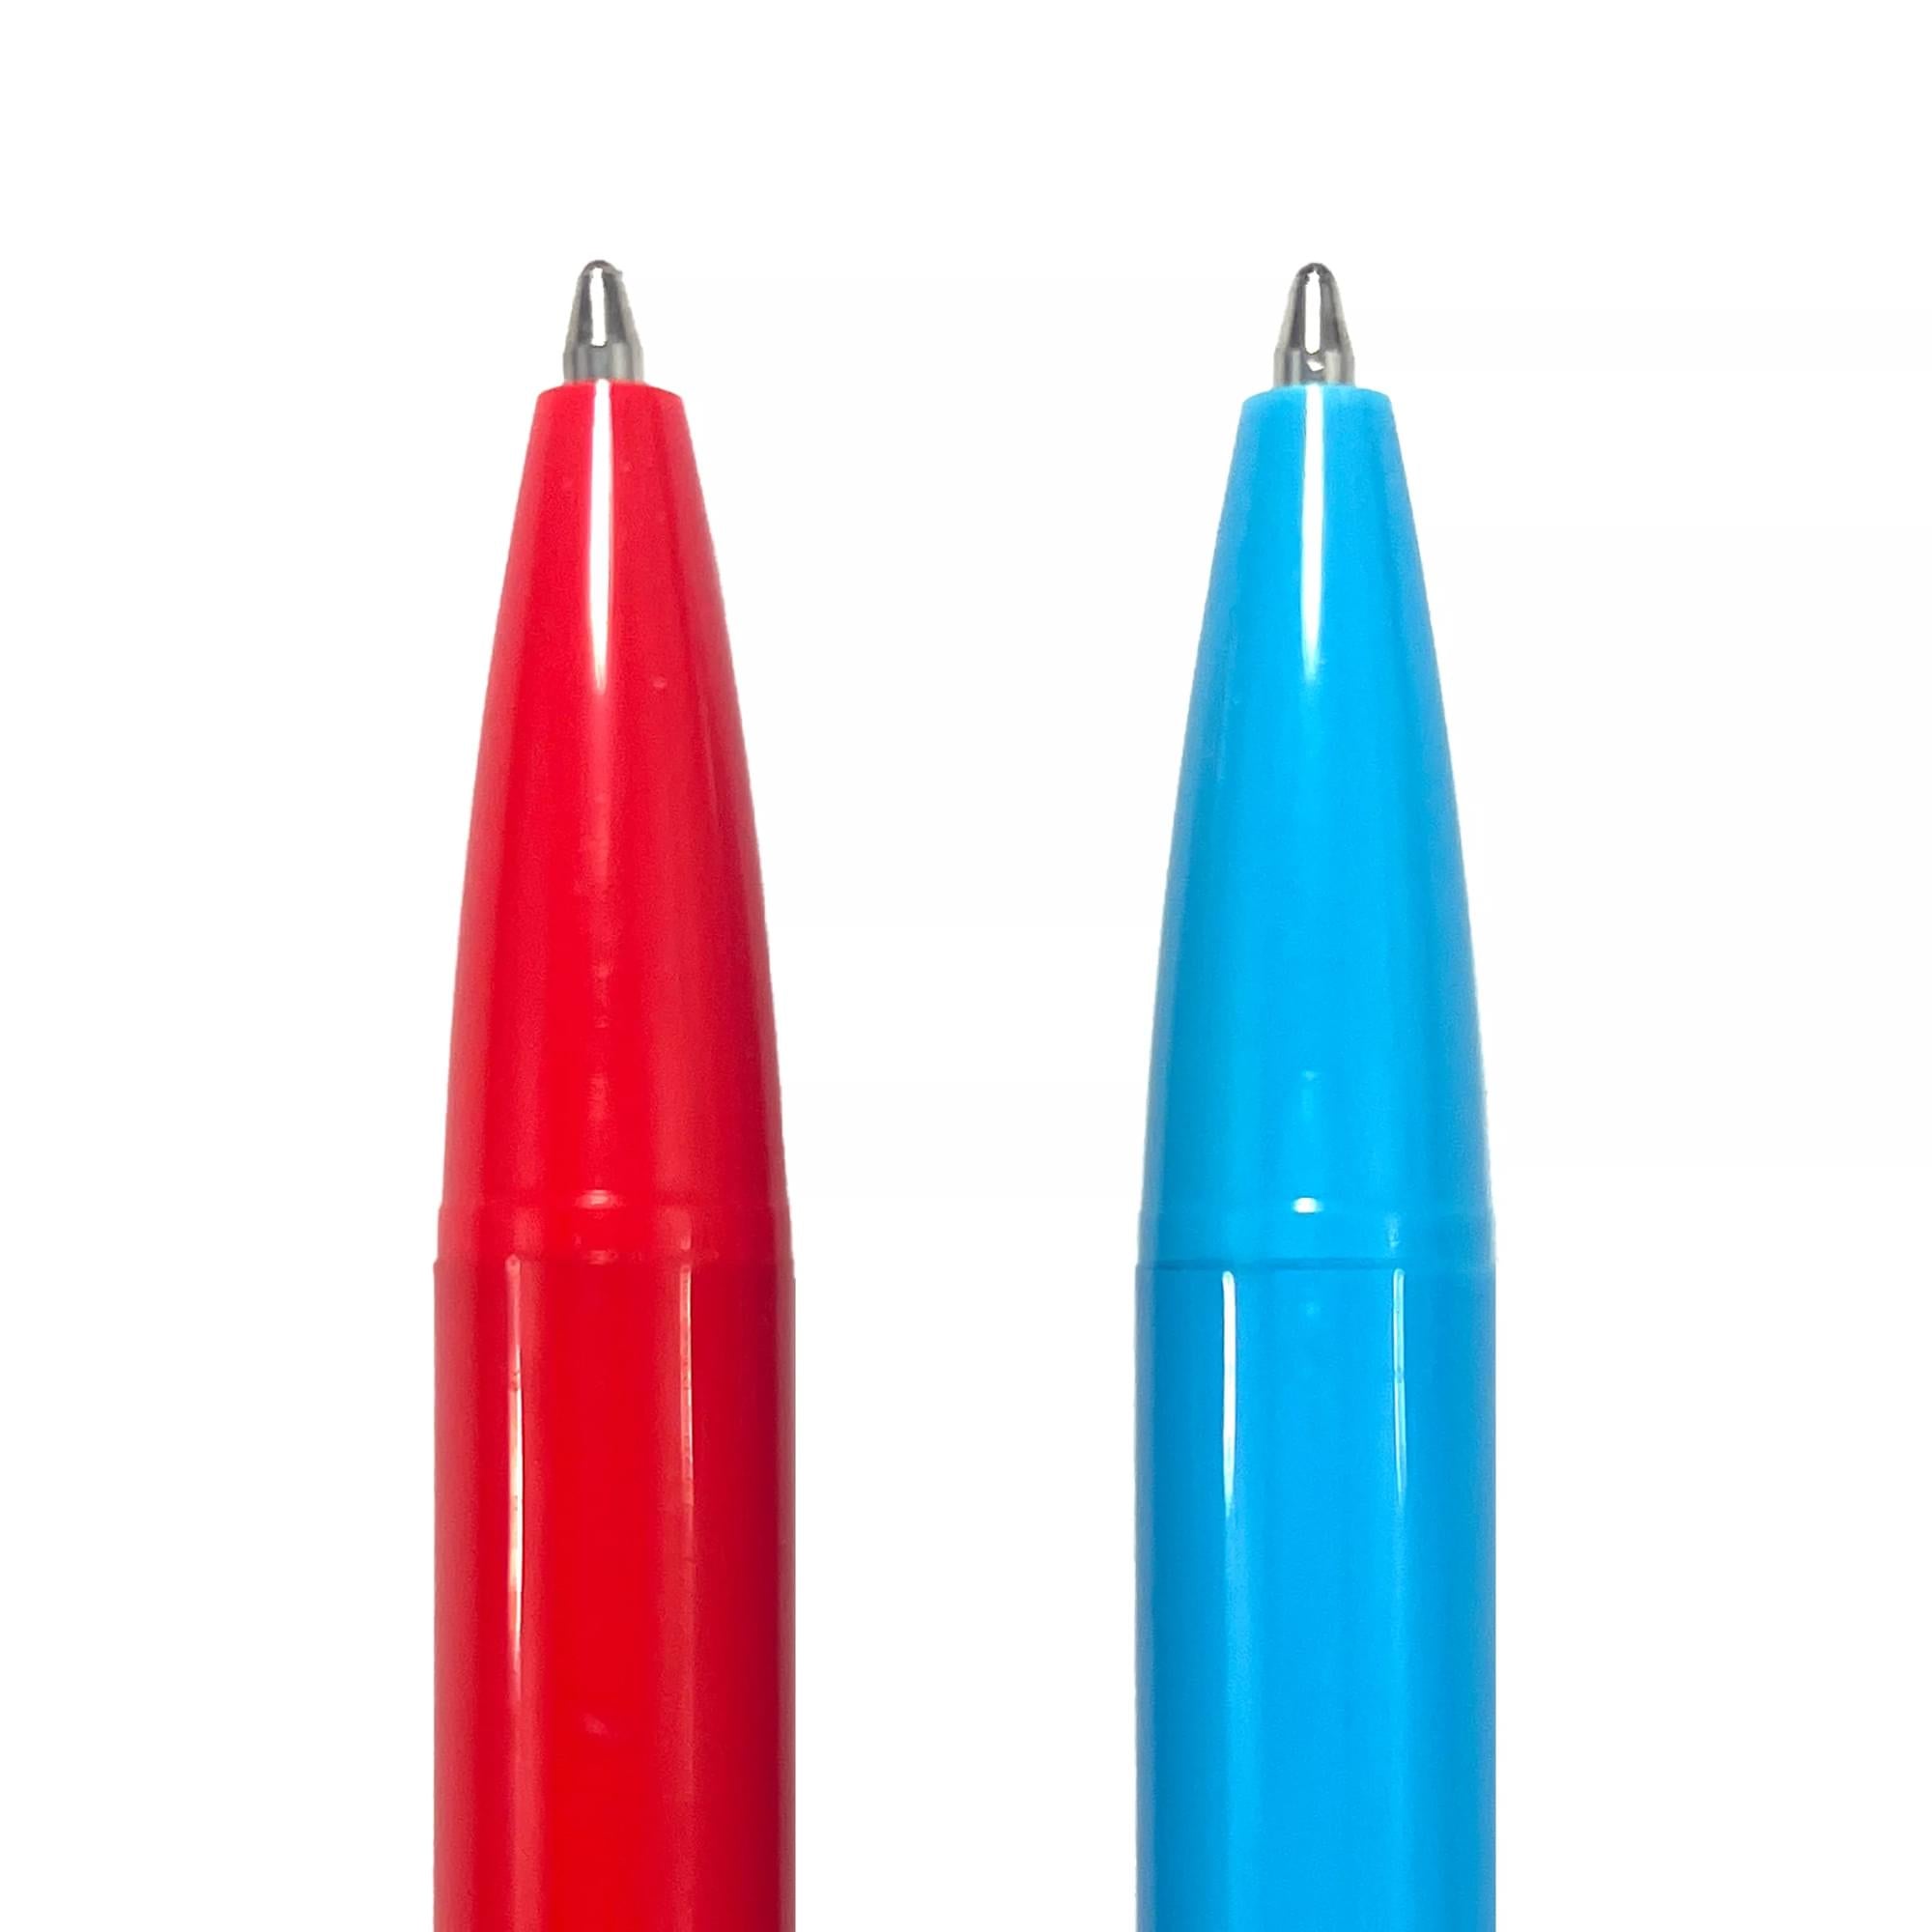 Close up of pen tips of OOLY Bright Writers Colored Ink Retractable Ballpoint Pens